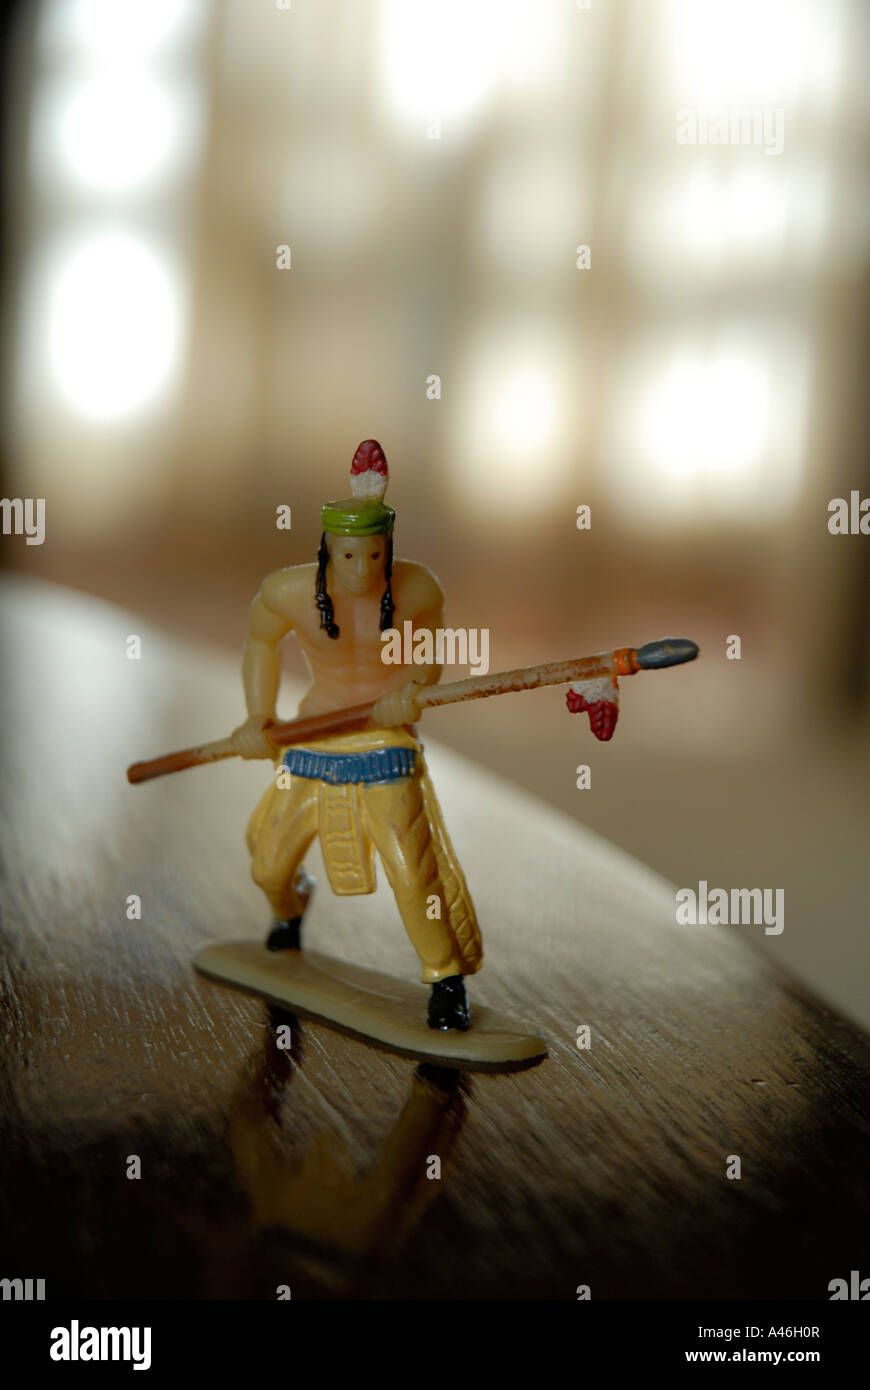 Toy Indian Stock Photo